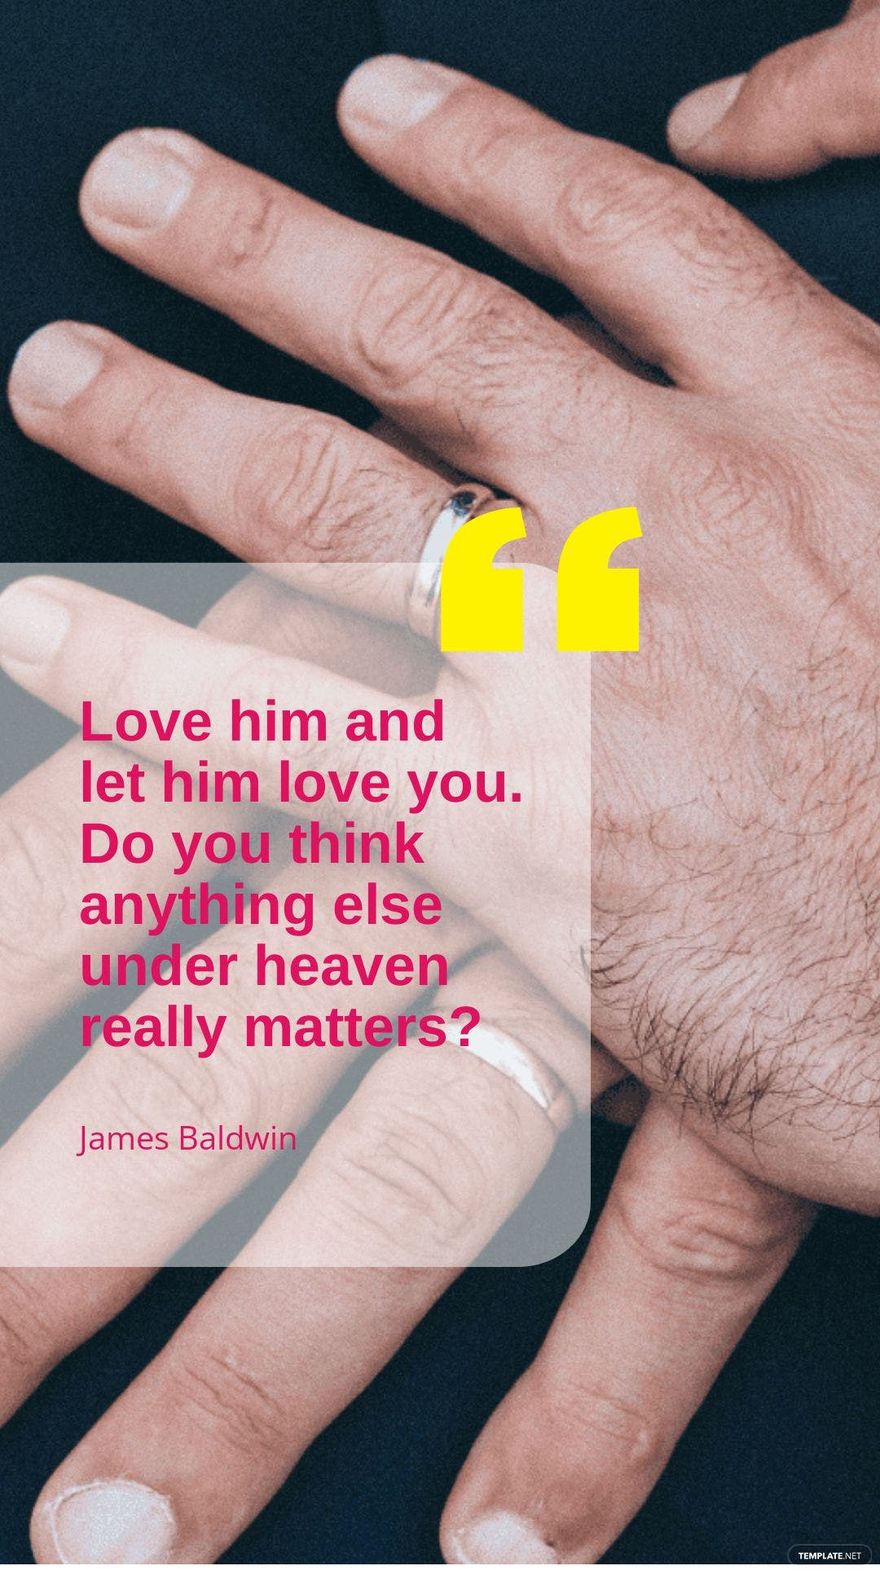 James Baldwin - Love him and let him love you. Do you think anything else under heaven really matters?